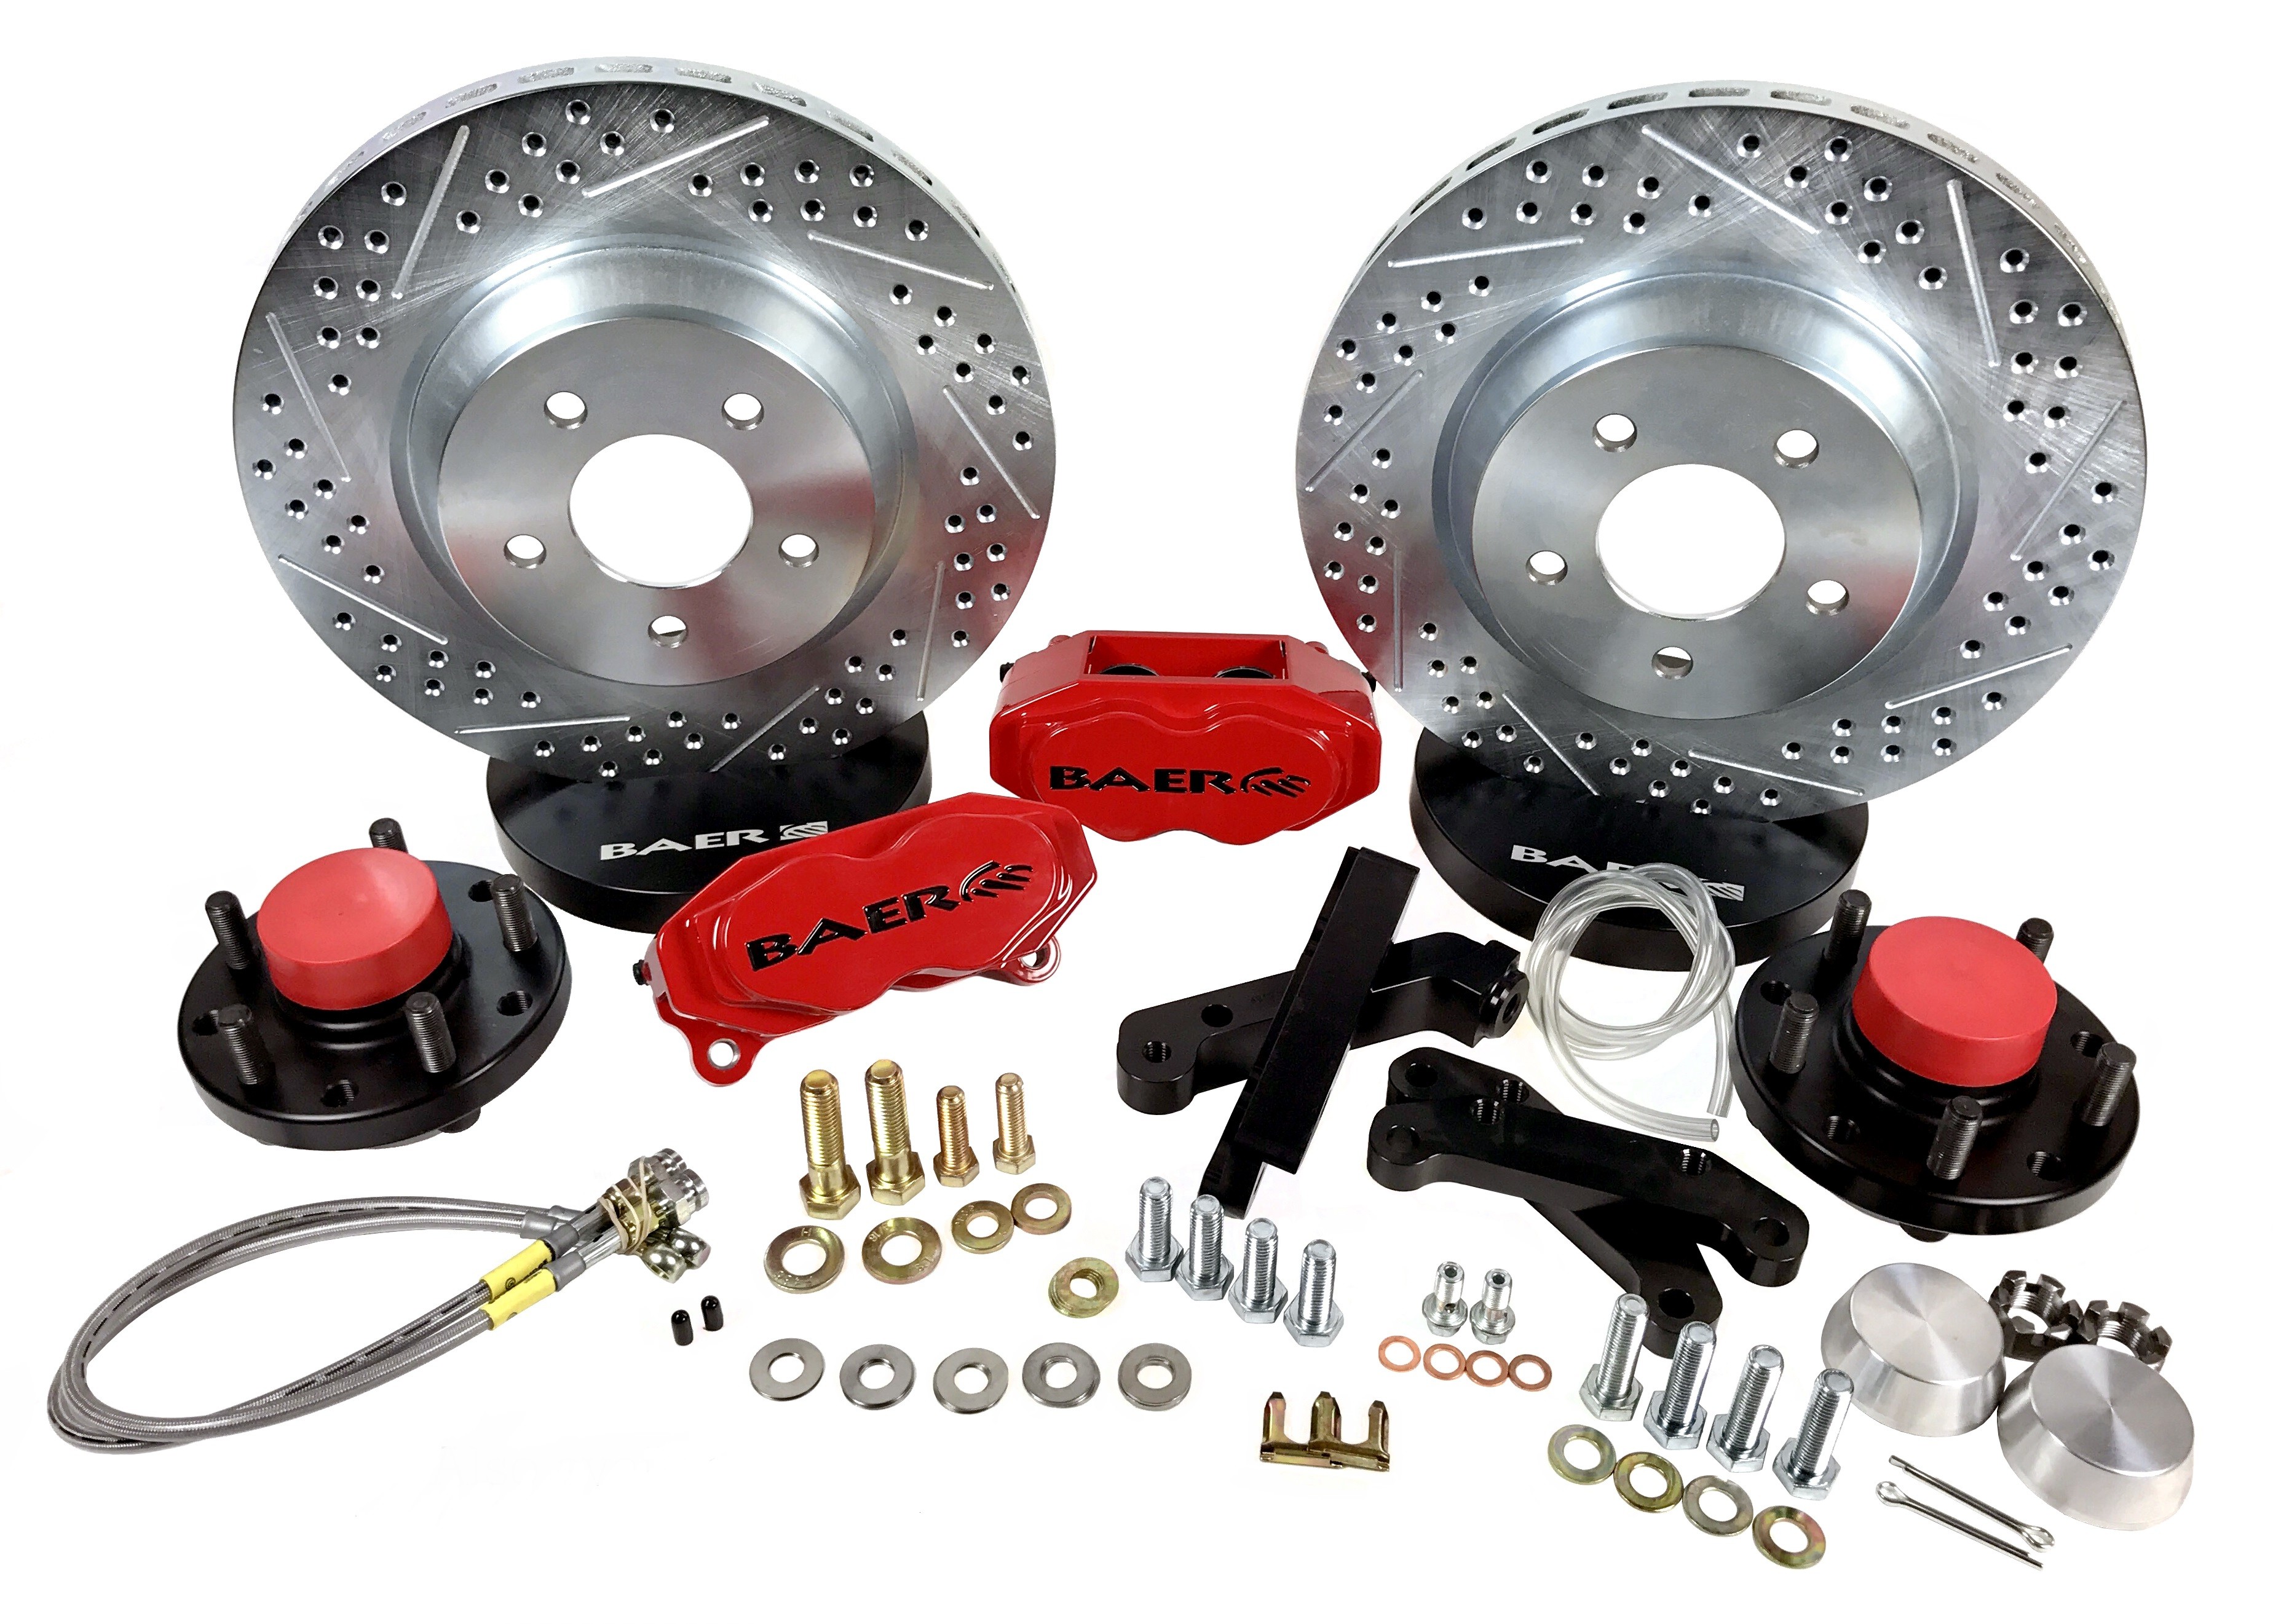 13" Front SS4 Brake System 